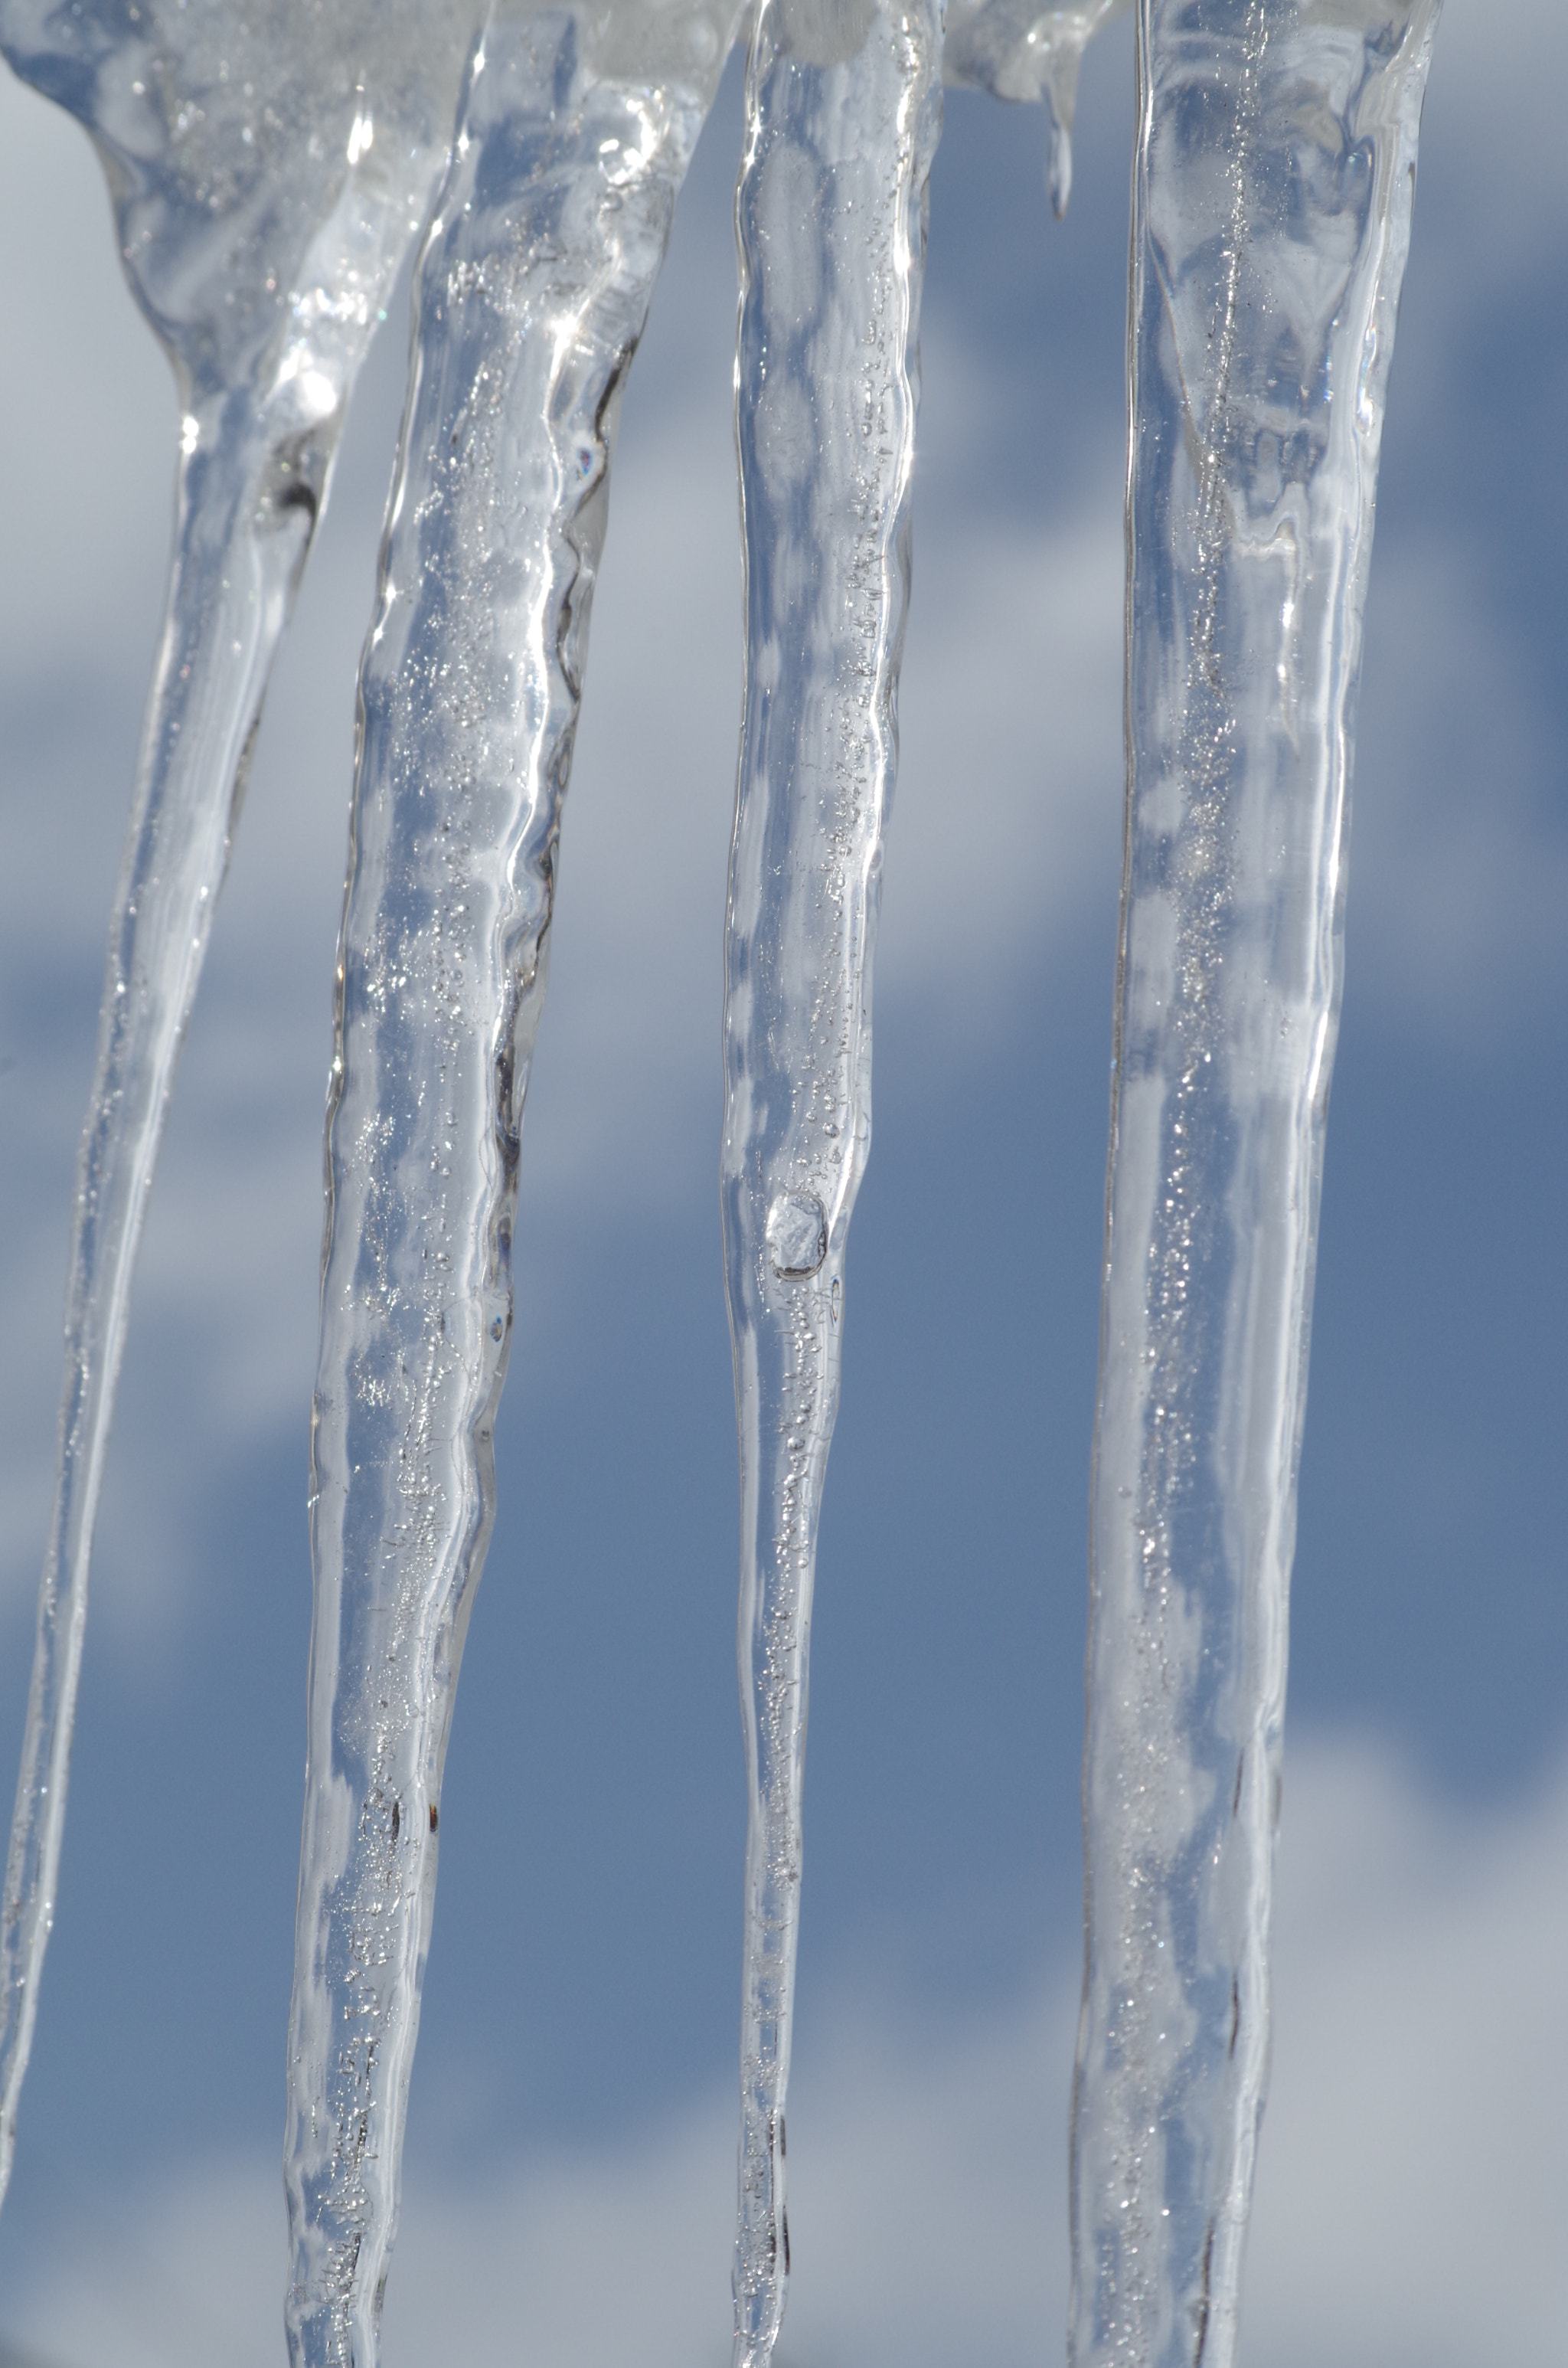 Pentax K-30 sample photo. Icicles photography